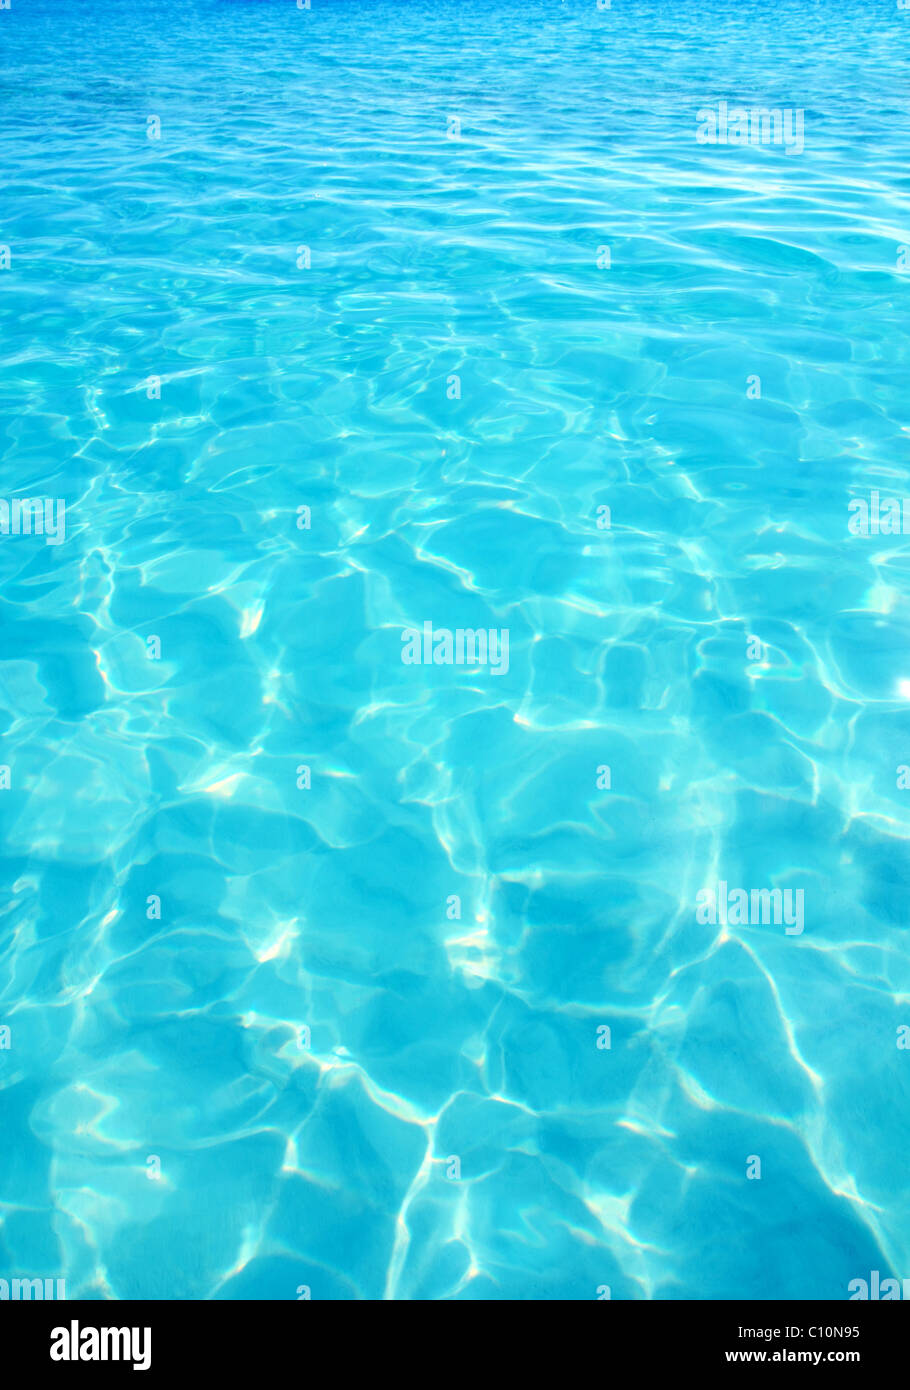 Caribbean turquoise water beach reflection aqua perspective background Stock Photo